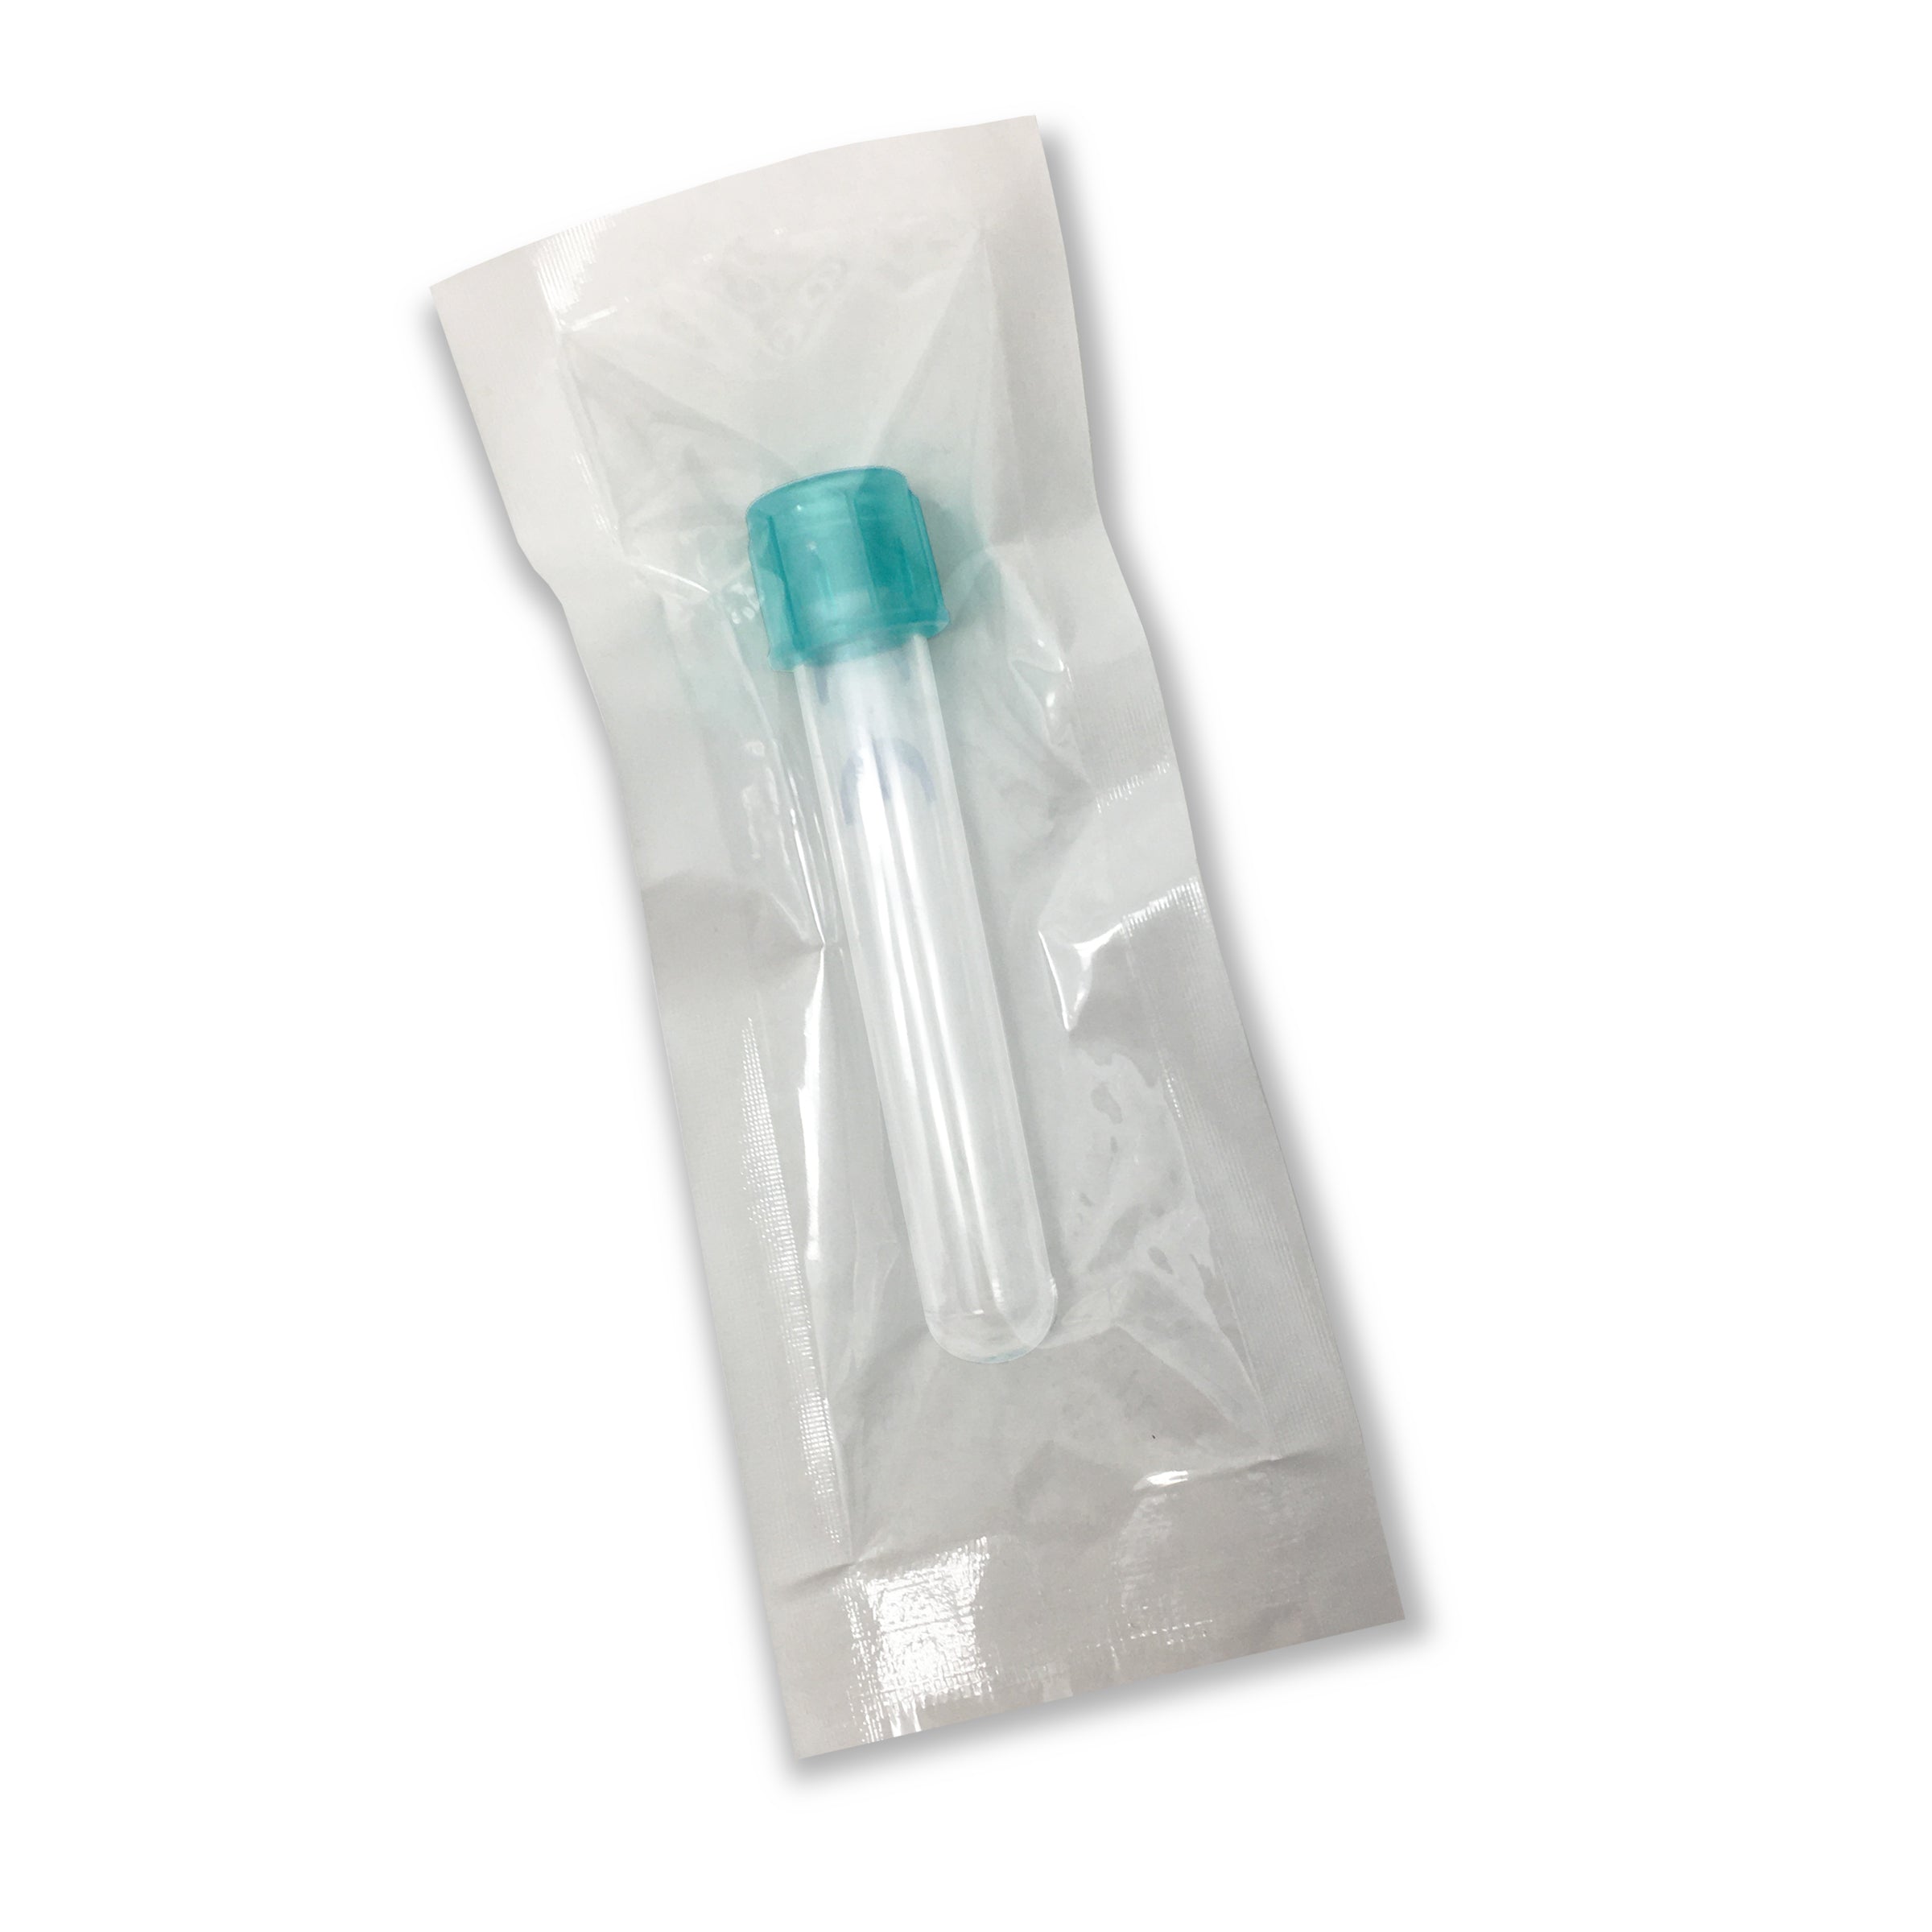 MTC Bio T9005-1S, Flowtubes with Strainer Cap, 12x75mm, Individually Wrapped , 500/cs